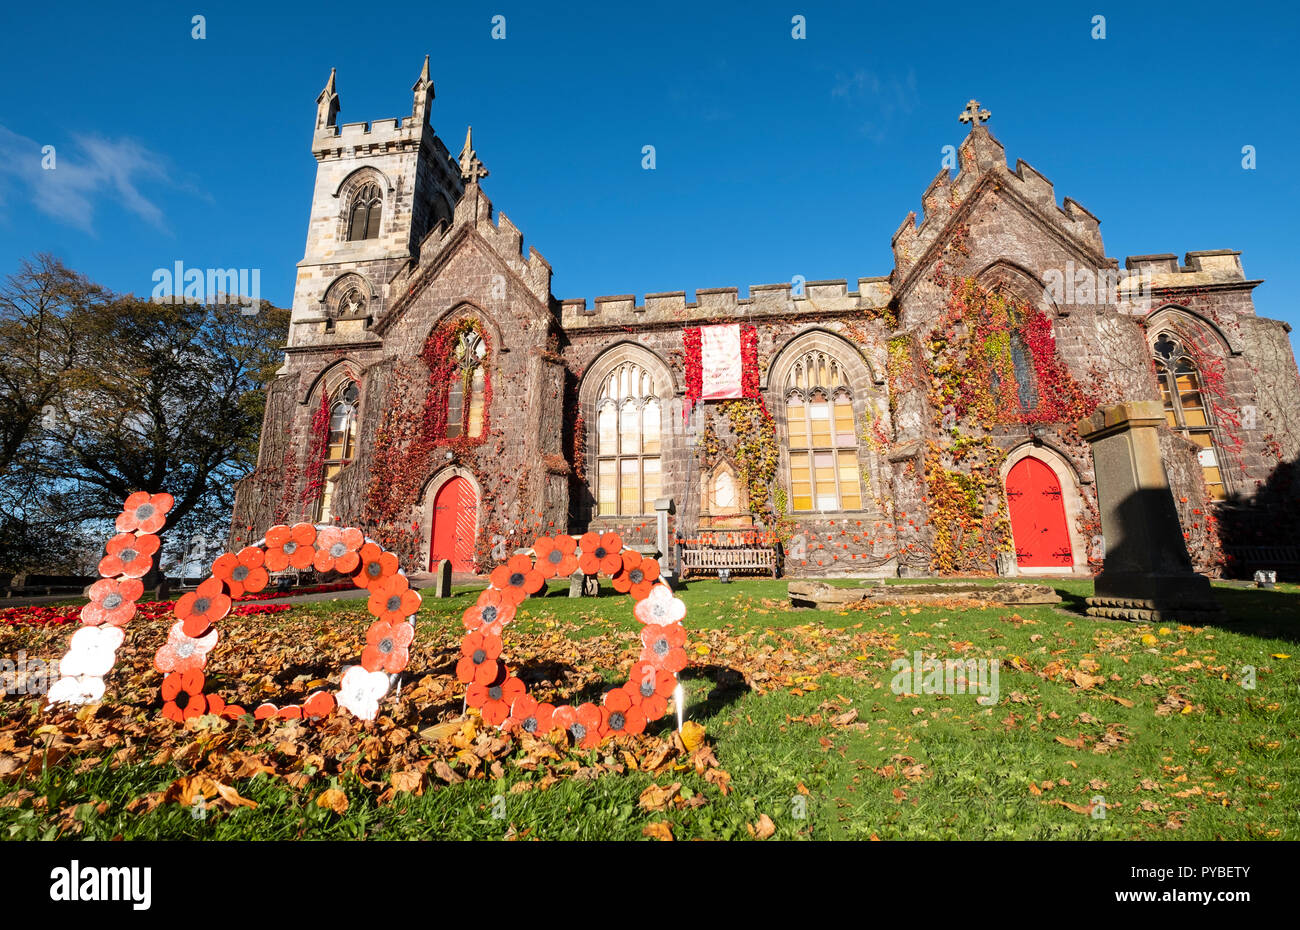 Edinburgh, Scotland, UK. 26 October, 2018. Liberton Kirk in Edinburgh is adorned with thousands of red poppies to mark the centenary of Armistice Day. The church bell tower is covered in a solid blanket of poppies made by the congregation. Credit: Iain Masterton/Alamy Live News Stock Photo